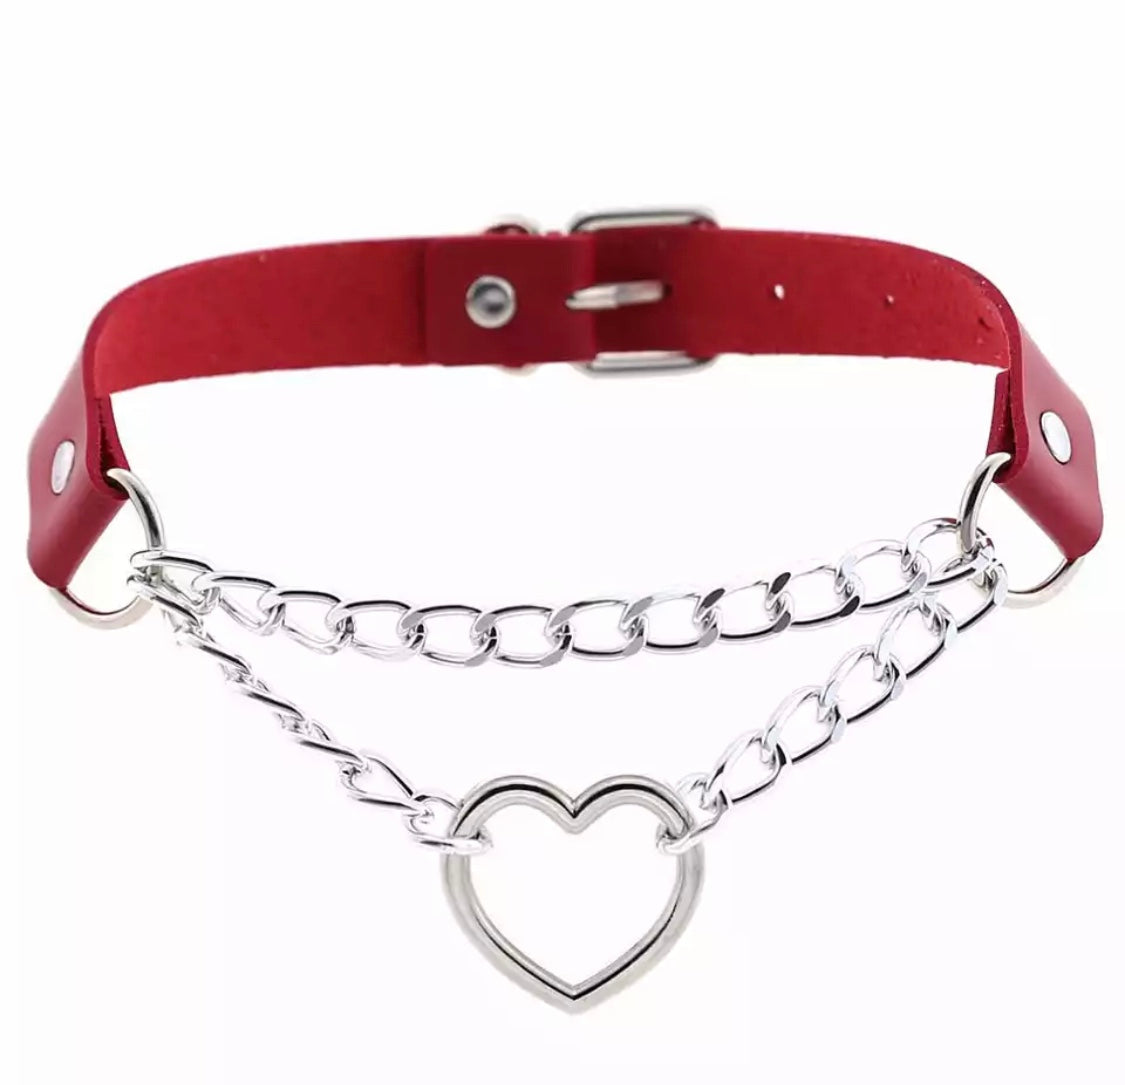 DDLGVERSE Vegan Leather Heart Chain Collar Red